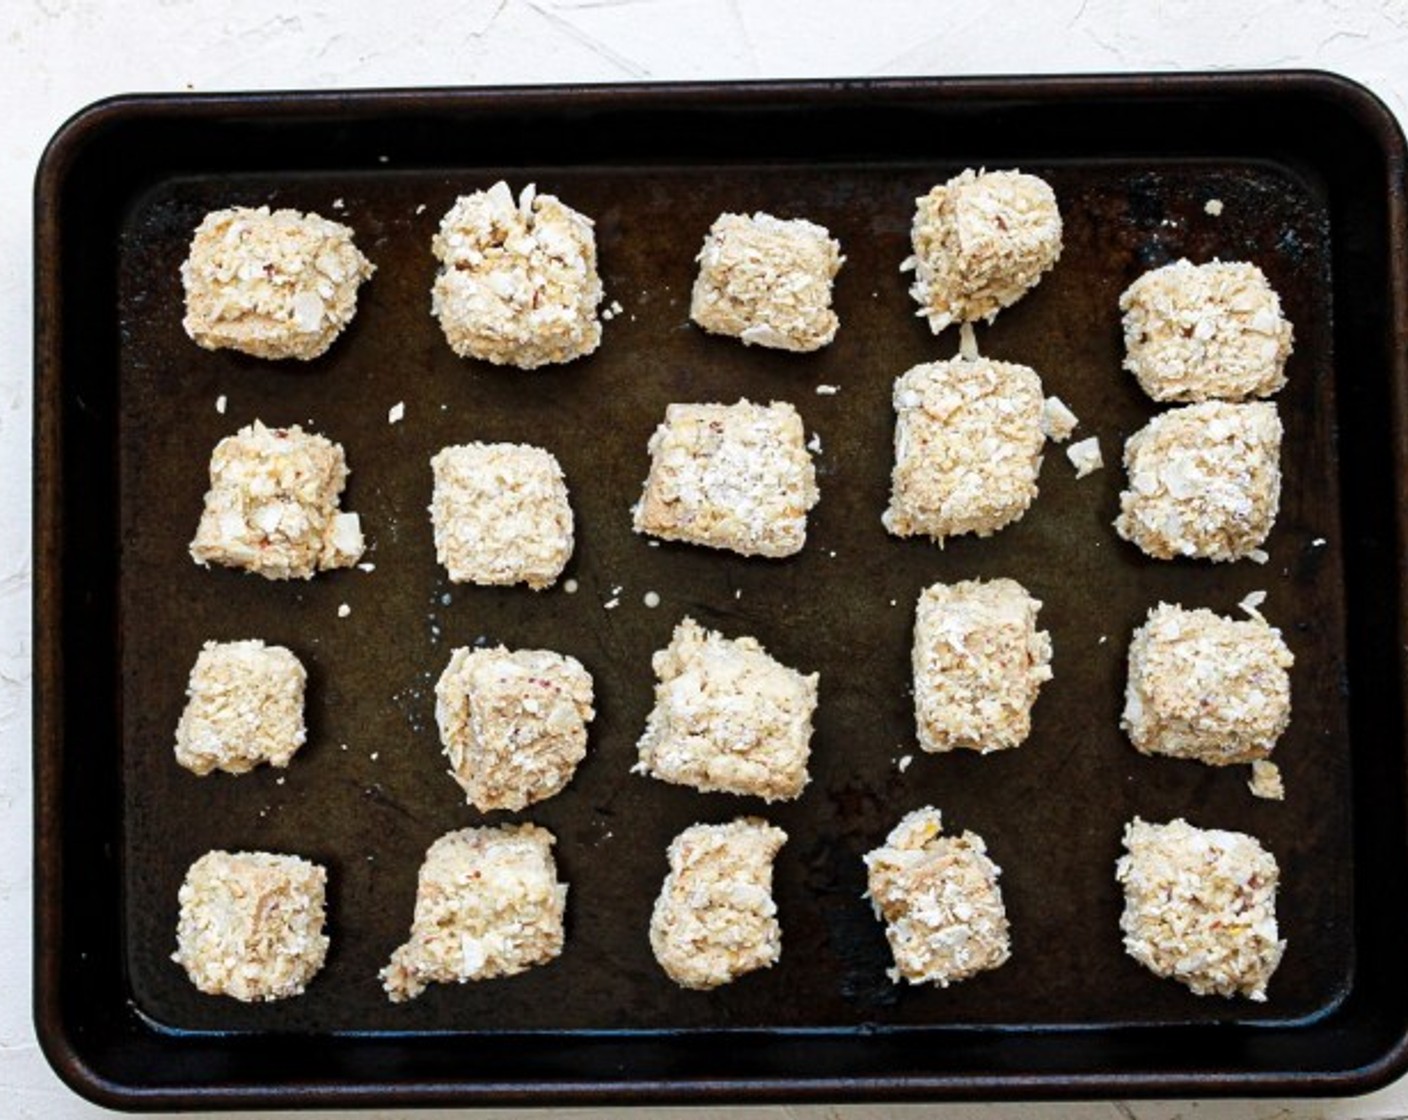 step 10 Remove the tofu from the container or bowl and place it on a separate sheet or paper towel. Repeat until all tofu pieces are coated.